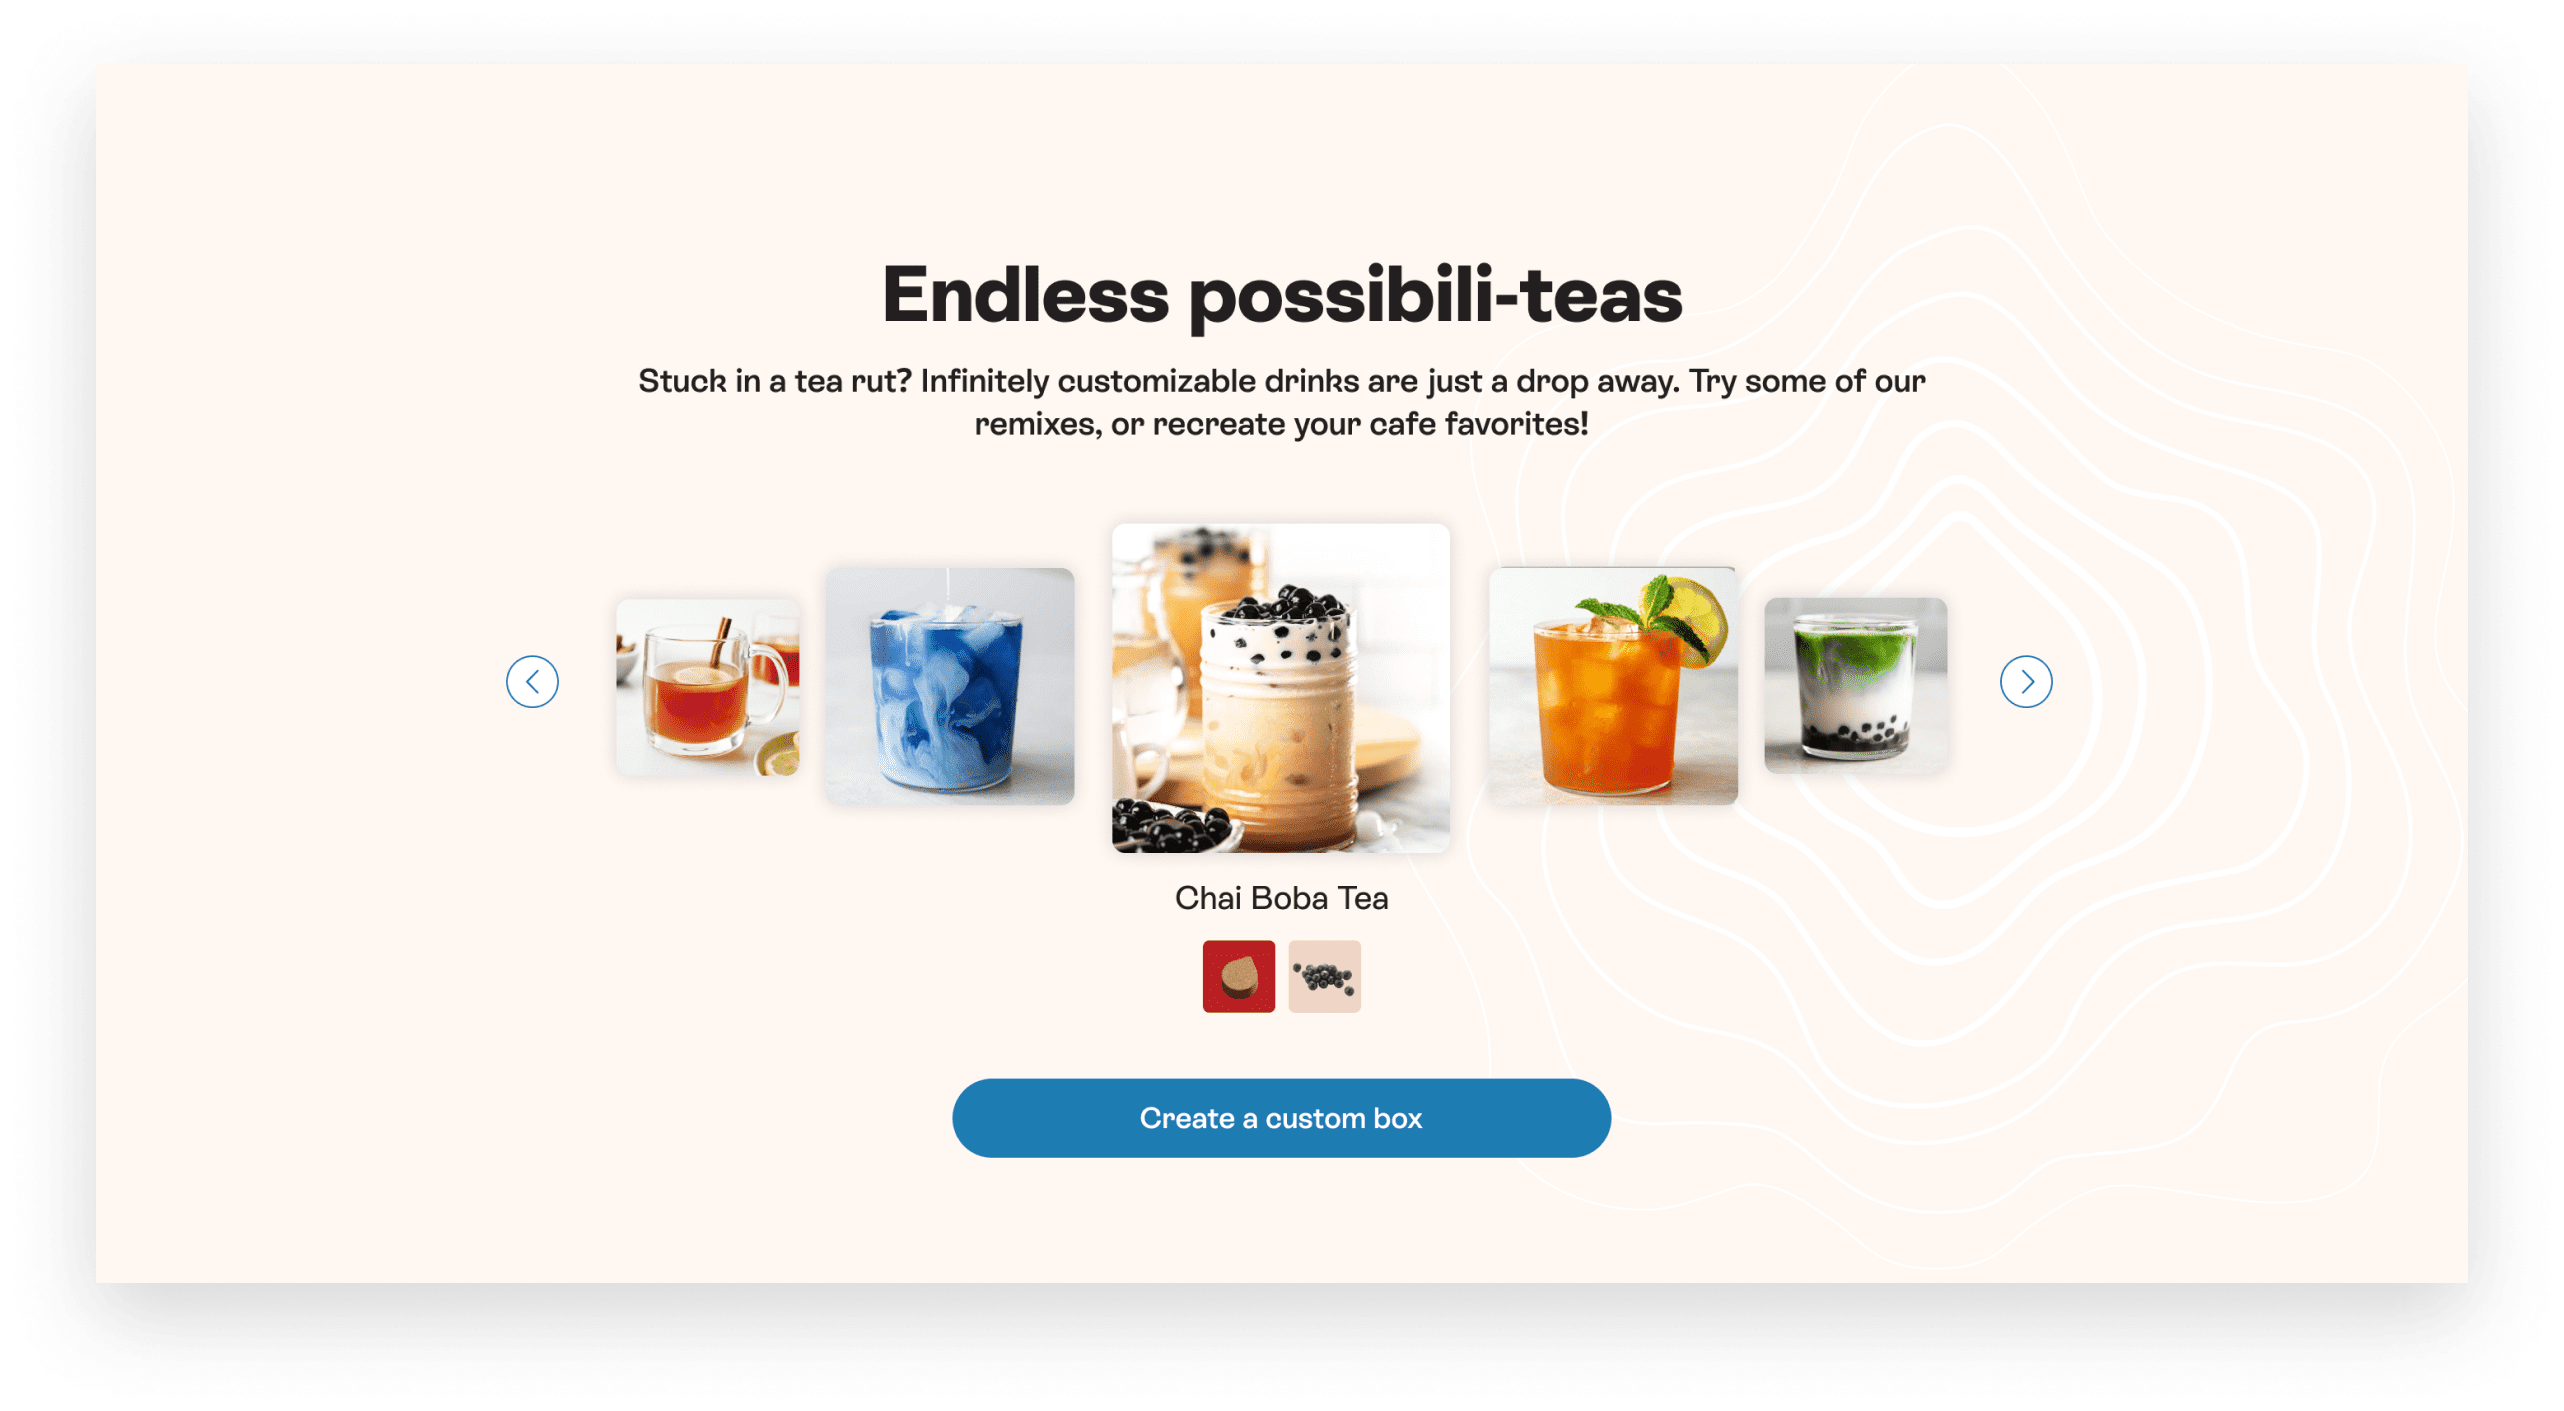 Box customization is introduced to the user through a visual showing the different types of drink combinations they can make.